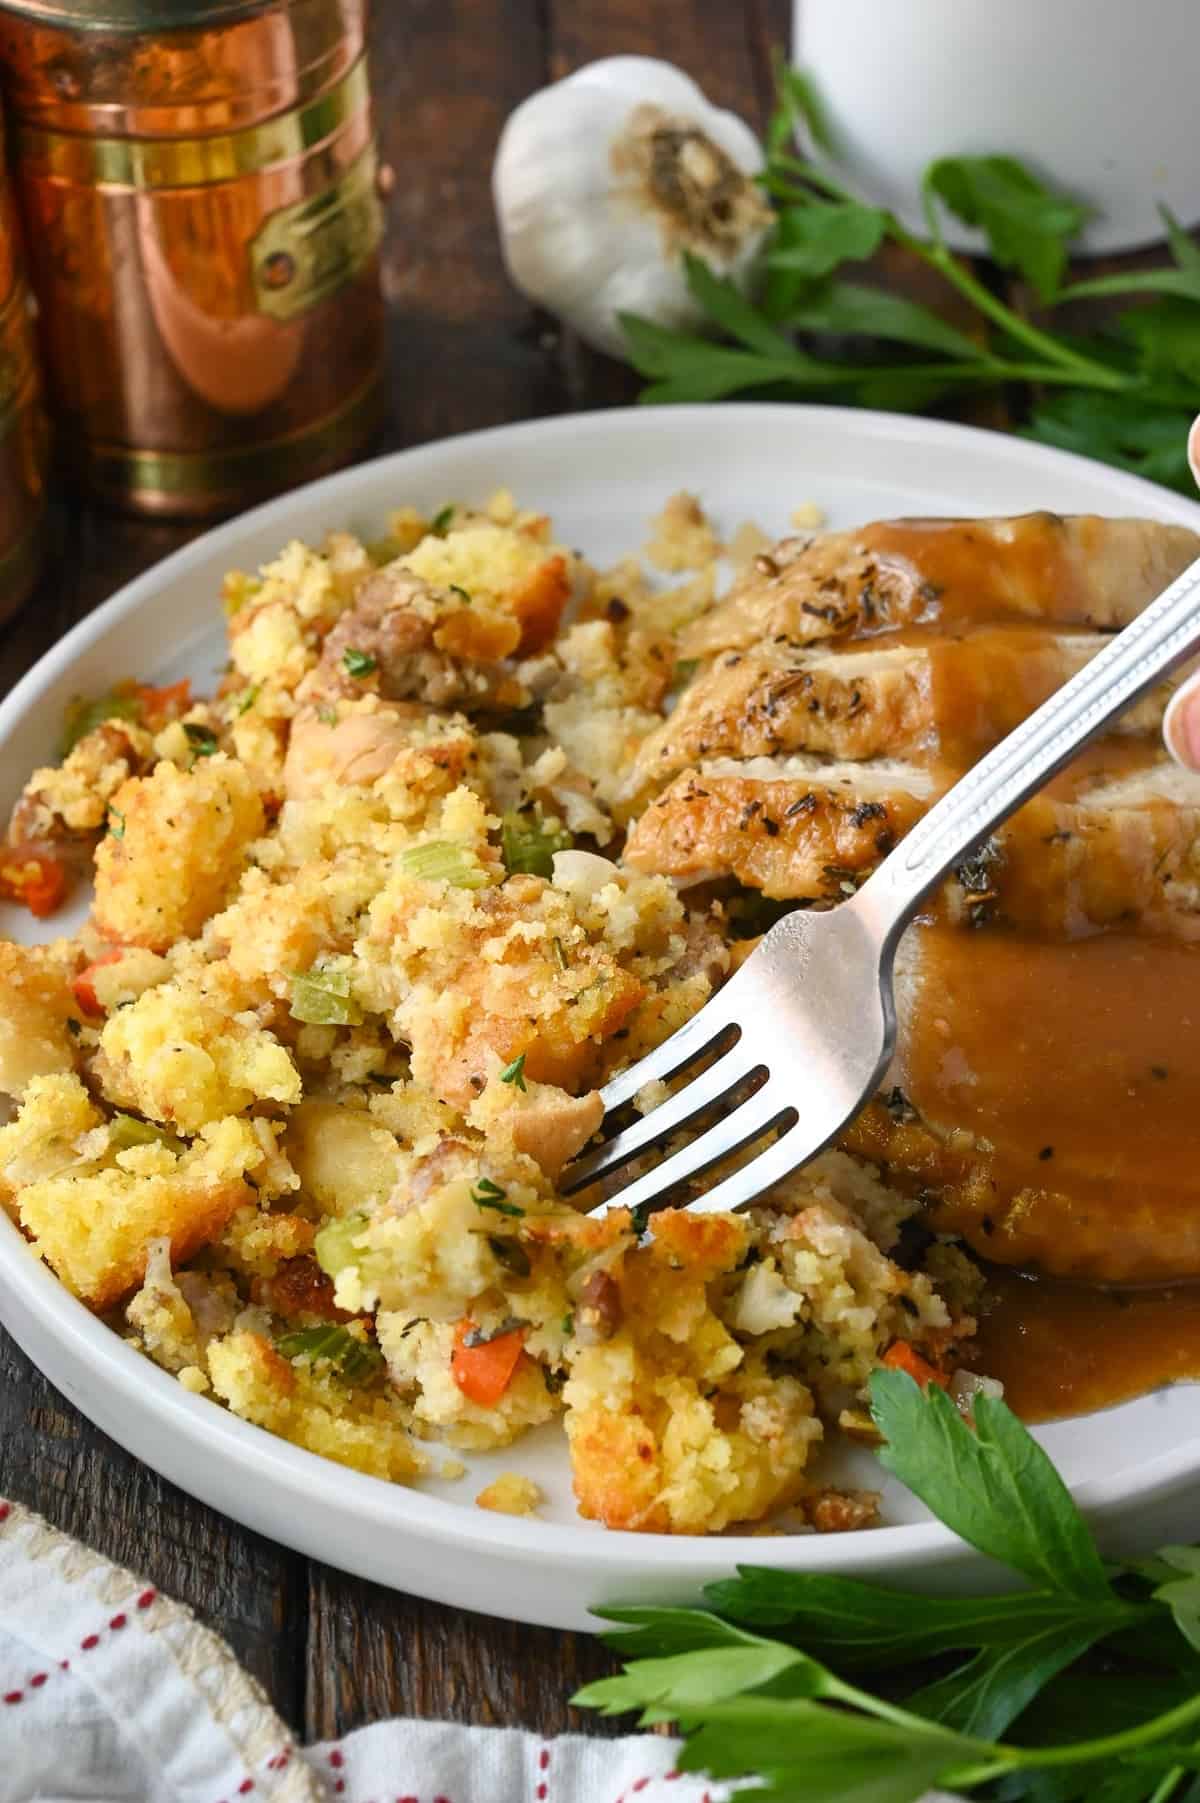 Cornbread dressing on a plate with turkey and gravy.